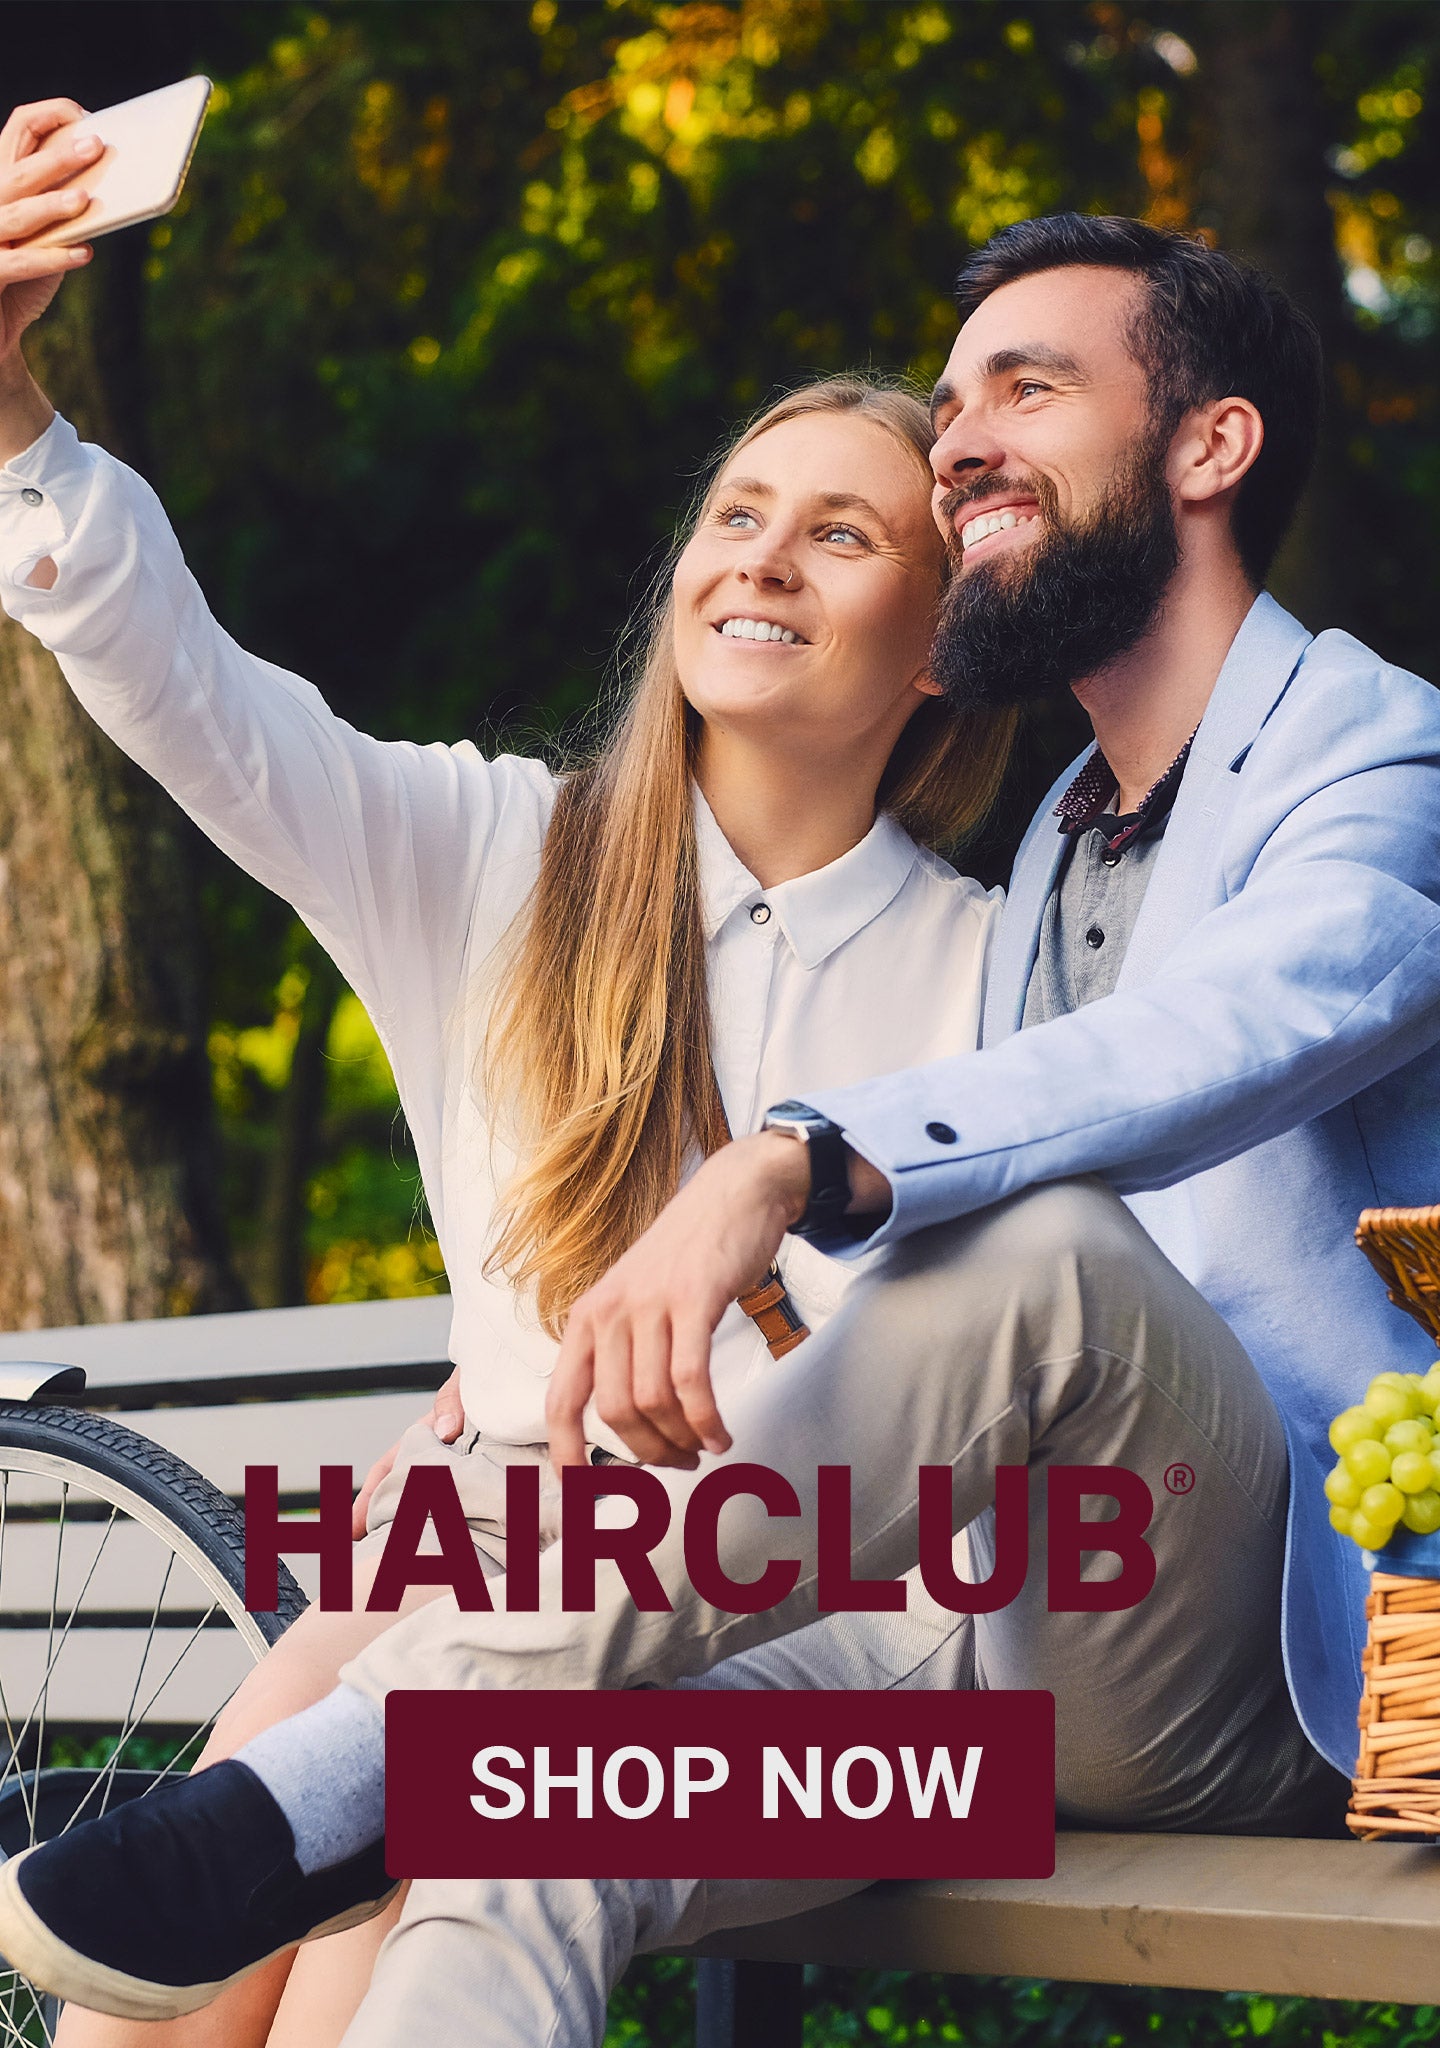 Spring Time with HairClub - Shop Now